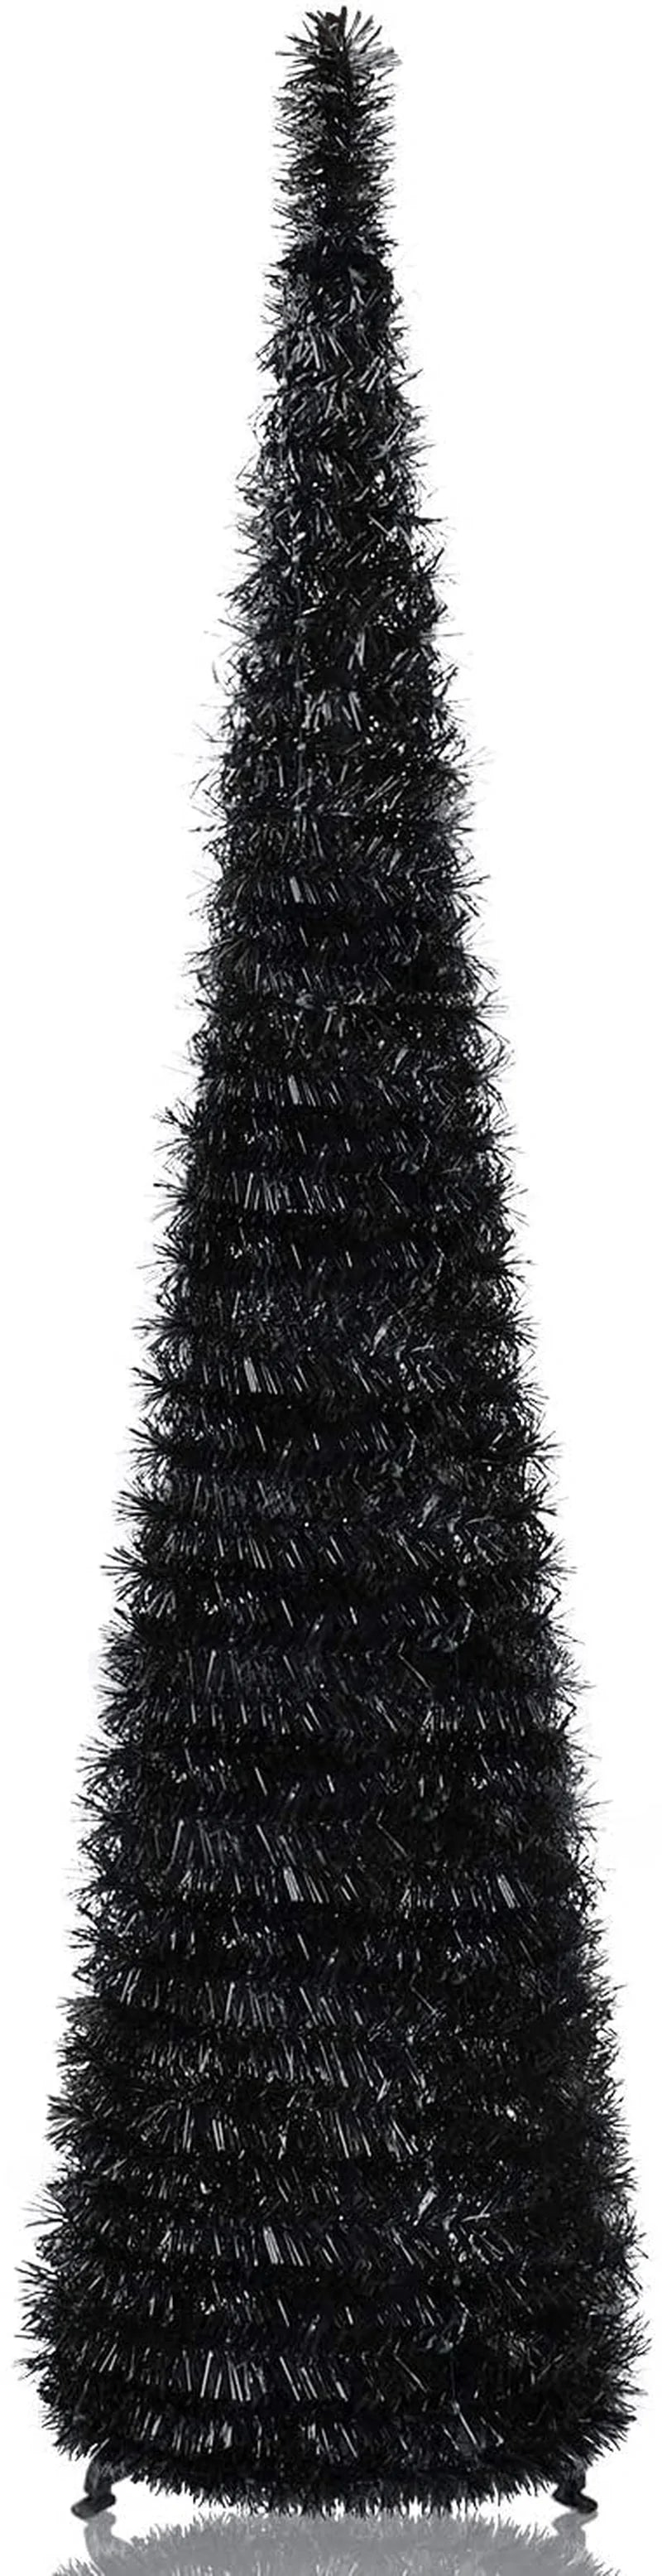 YuQi 5FT Pop Up Black Tinsel Trees Collapsible Reusable for Cosplay Tree in Christmas Halloween Wedding, Artificial Pencil Slim Xmas Tree Easy-Assembly w/Plastic Stand